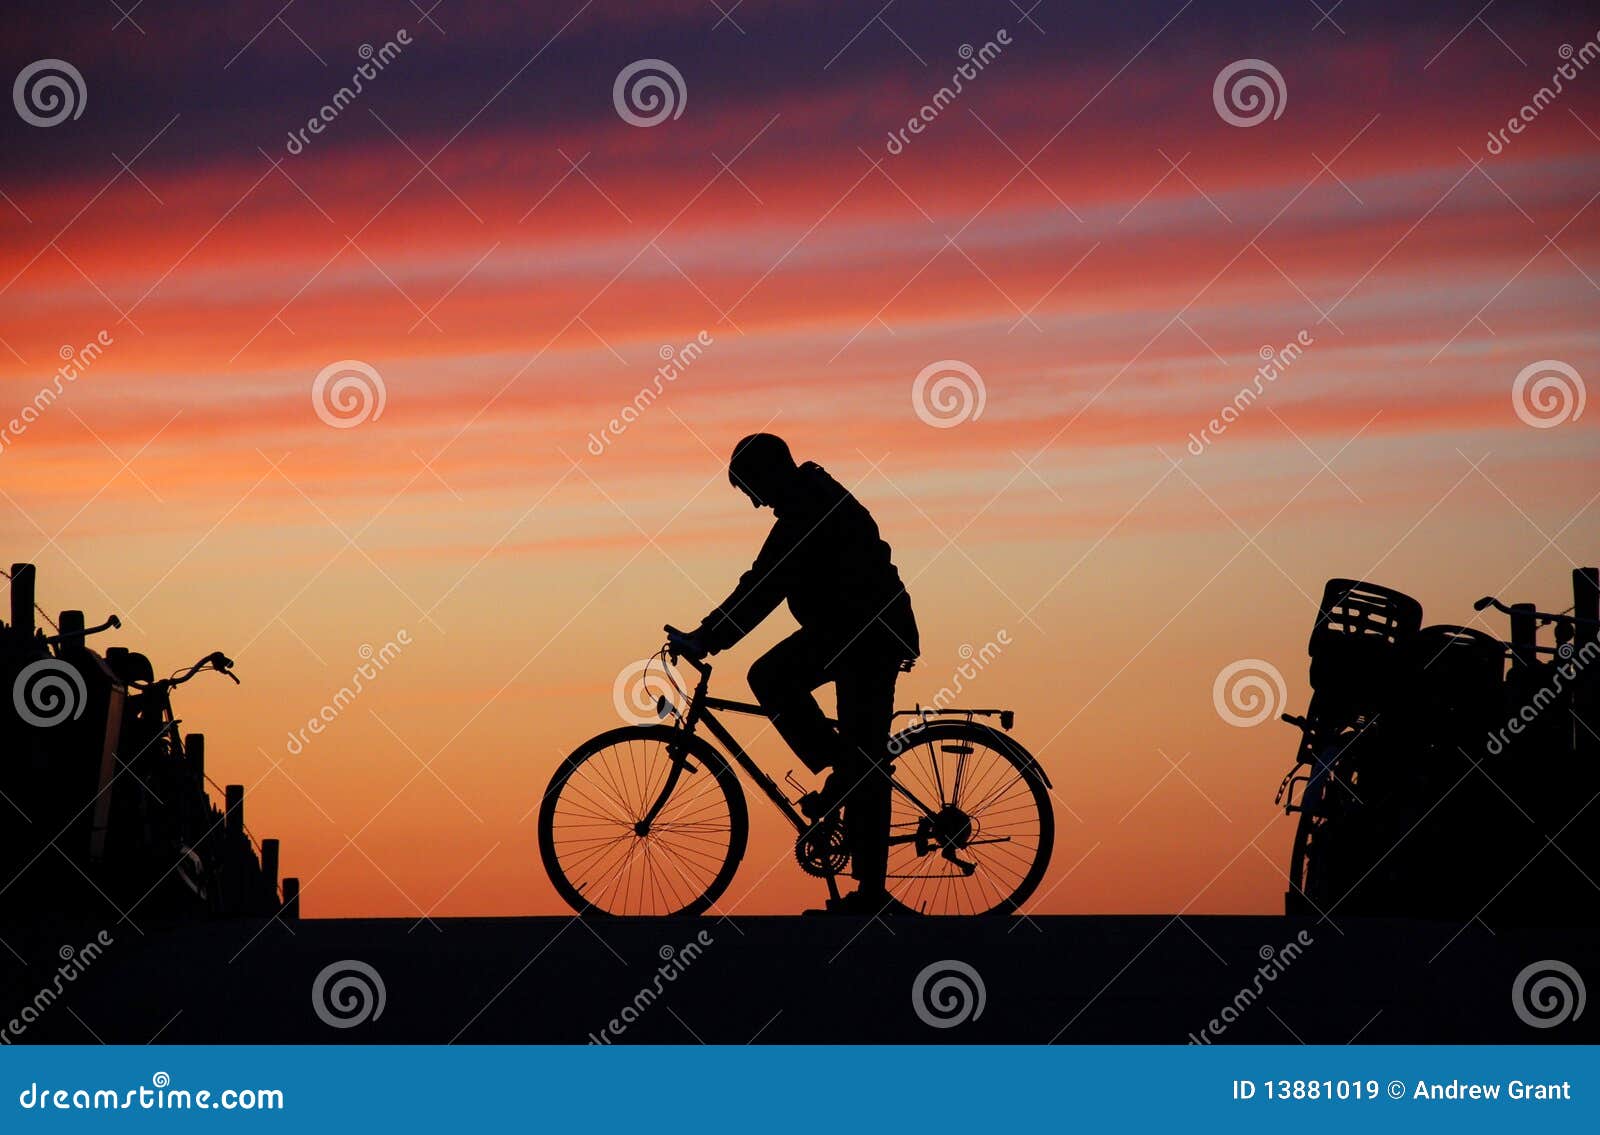 cyclist at rest